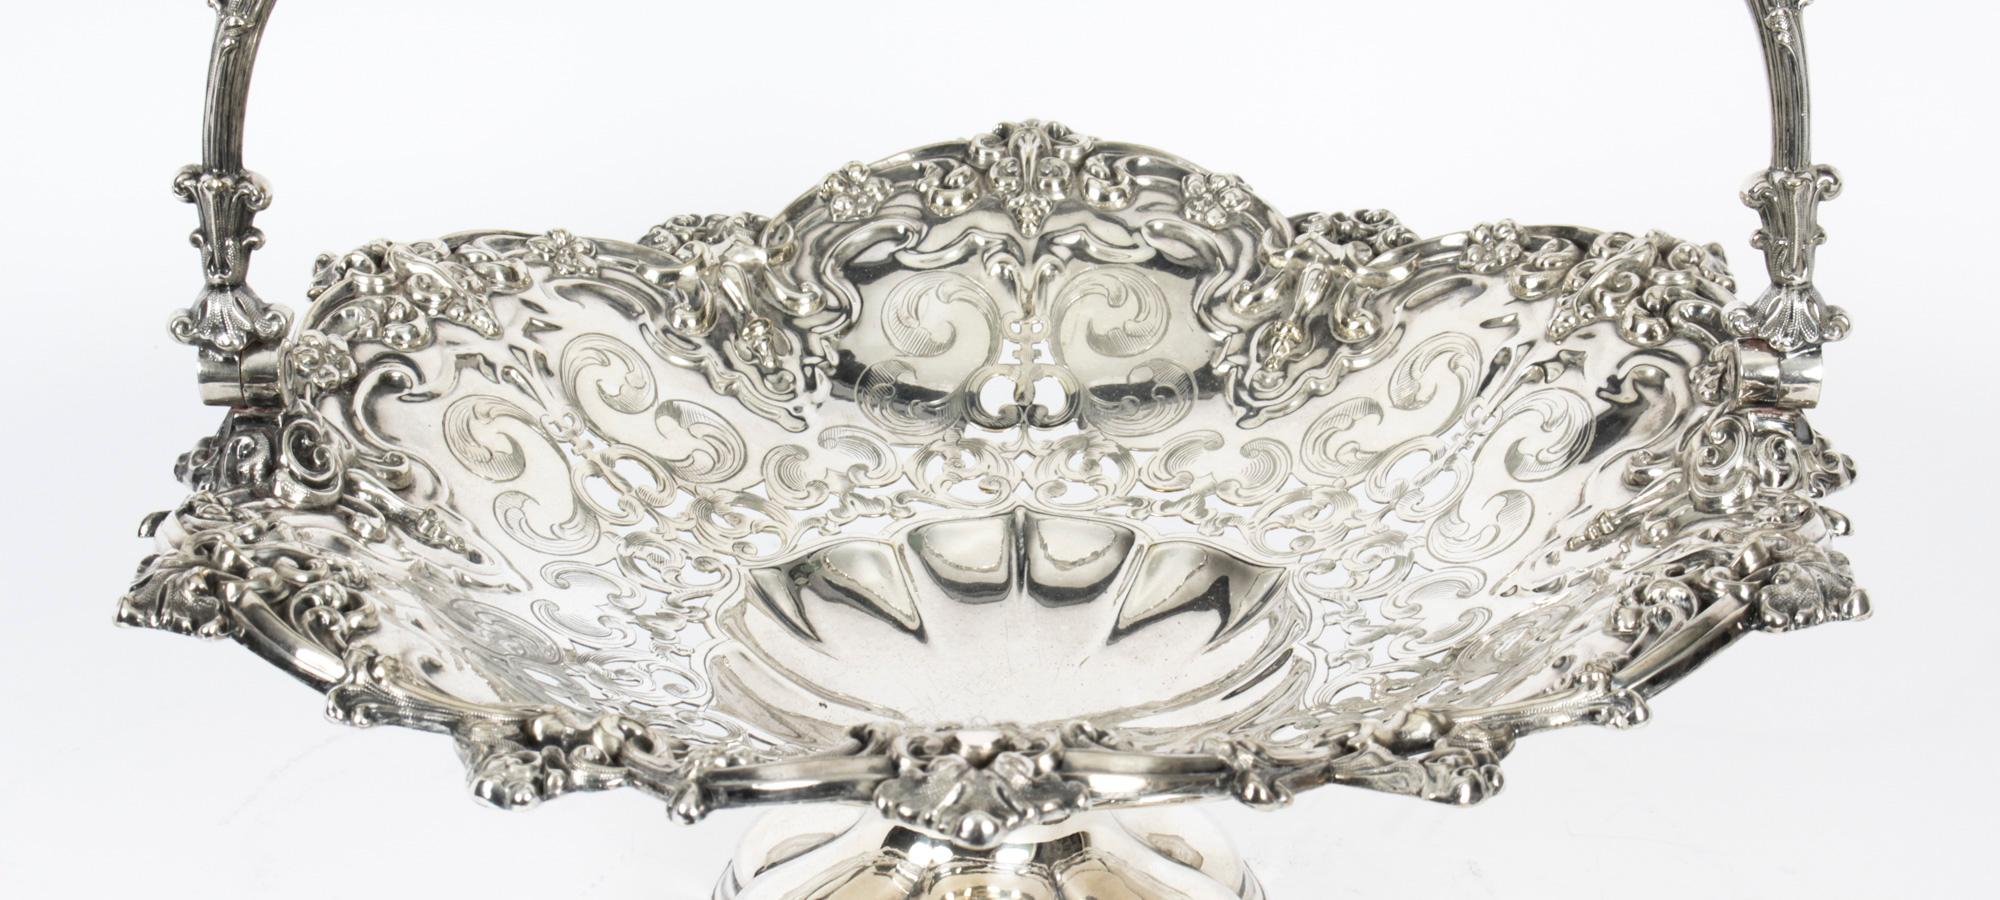 Antique Silver Plated Fruit Basket Wilkinson & Co 19th Century 6